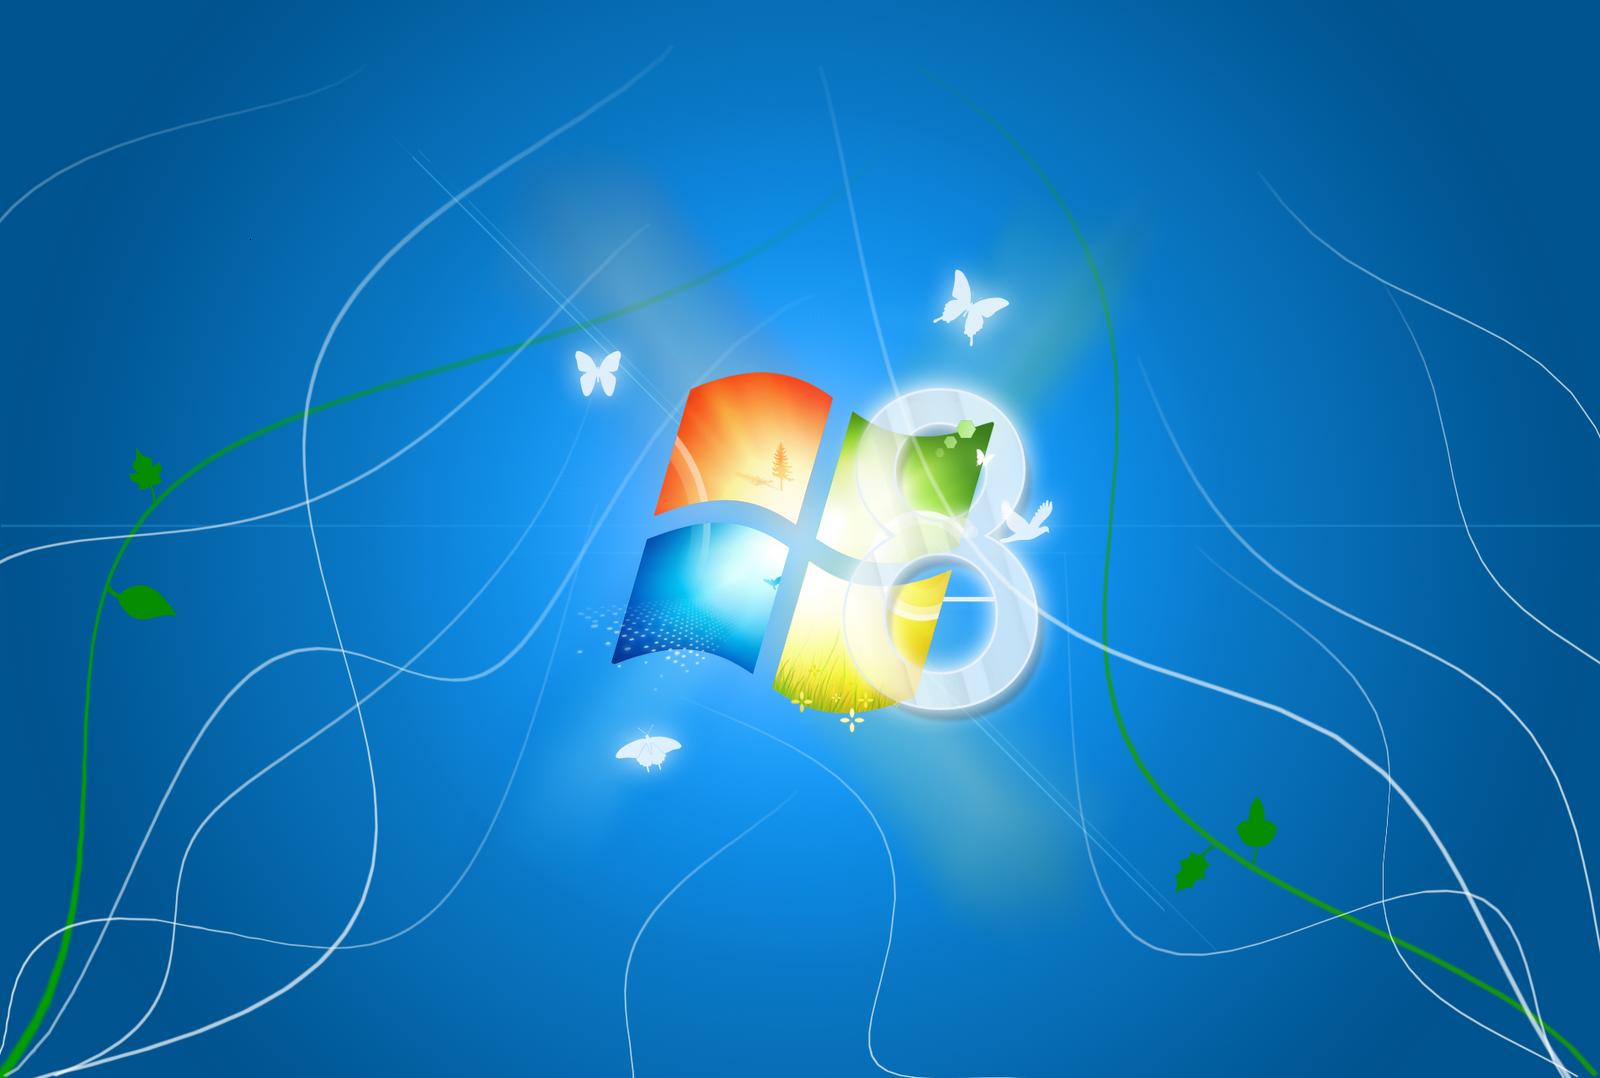 Three Ways That Windows 8 Will Improve Your Virtual Office